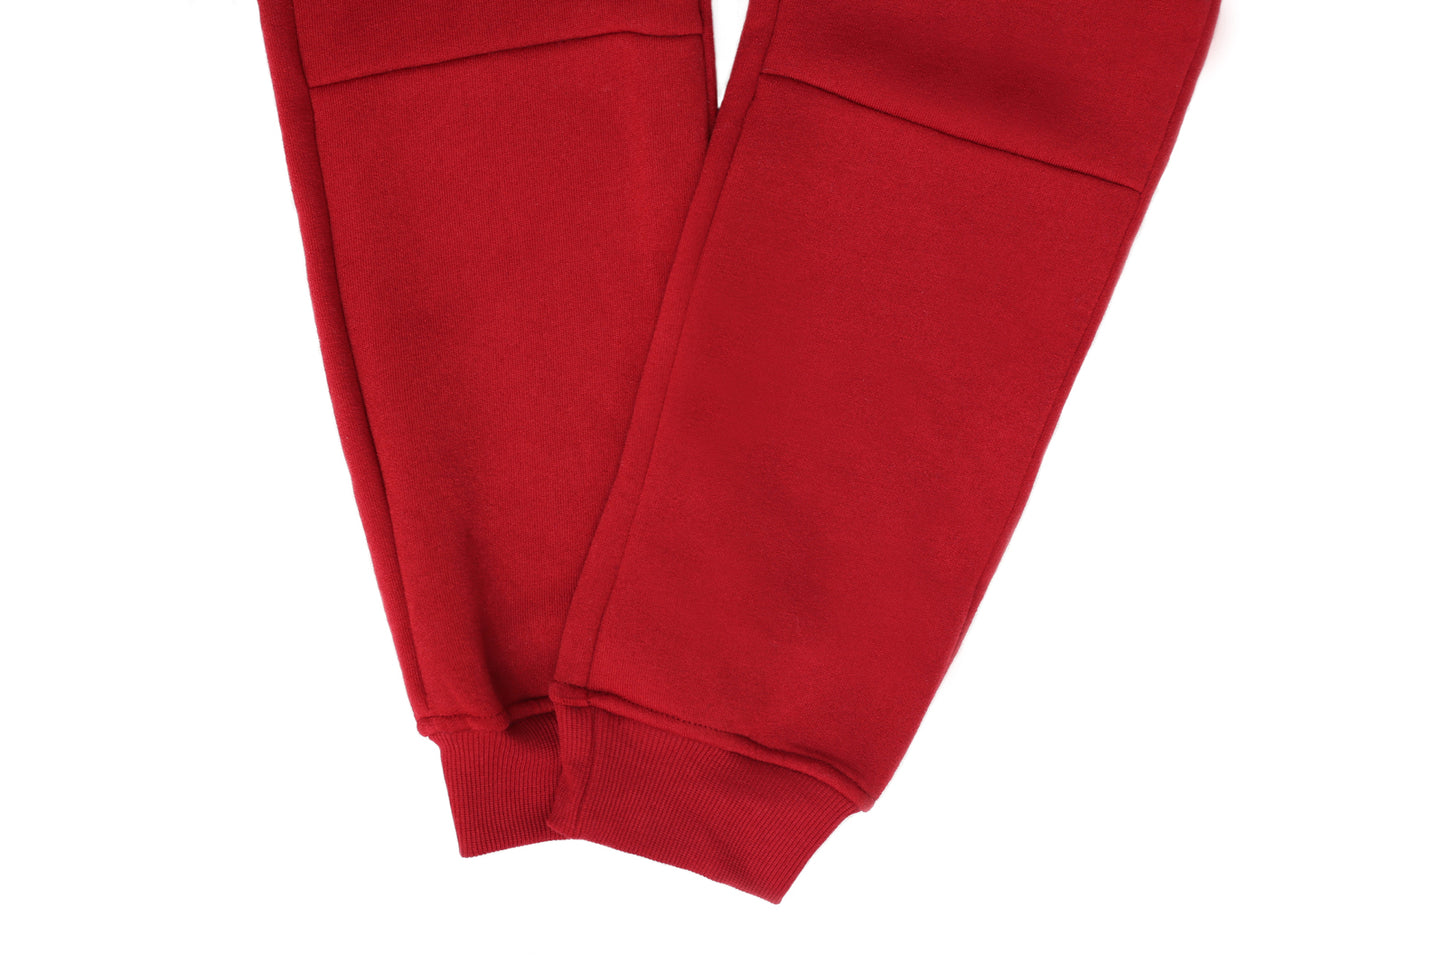 Mens Skinny Track Pants Joggers Trousers Gym Casual Sweat Cuffed Slim Trackies Fleece - Red - XL